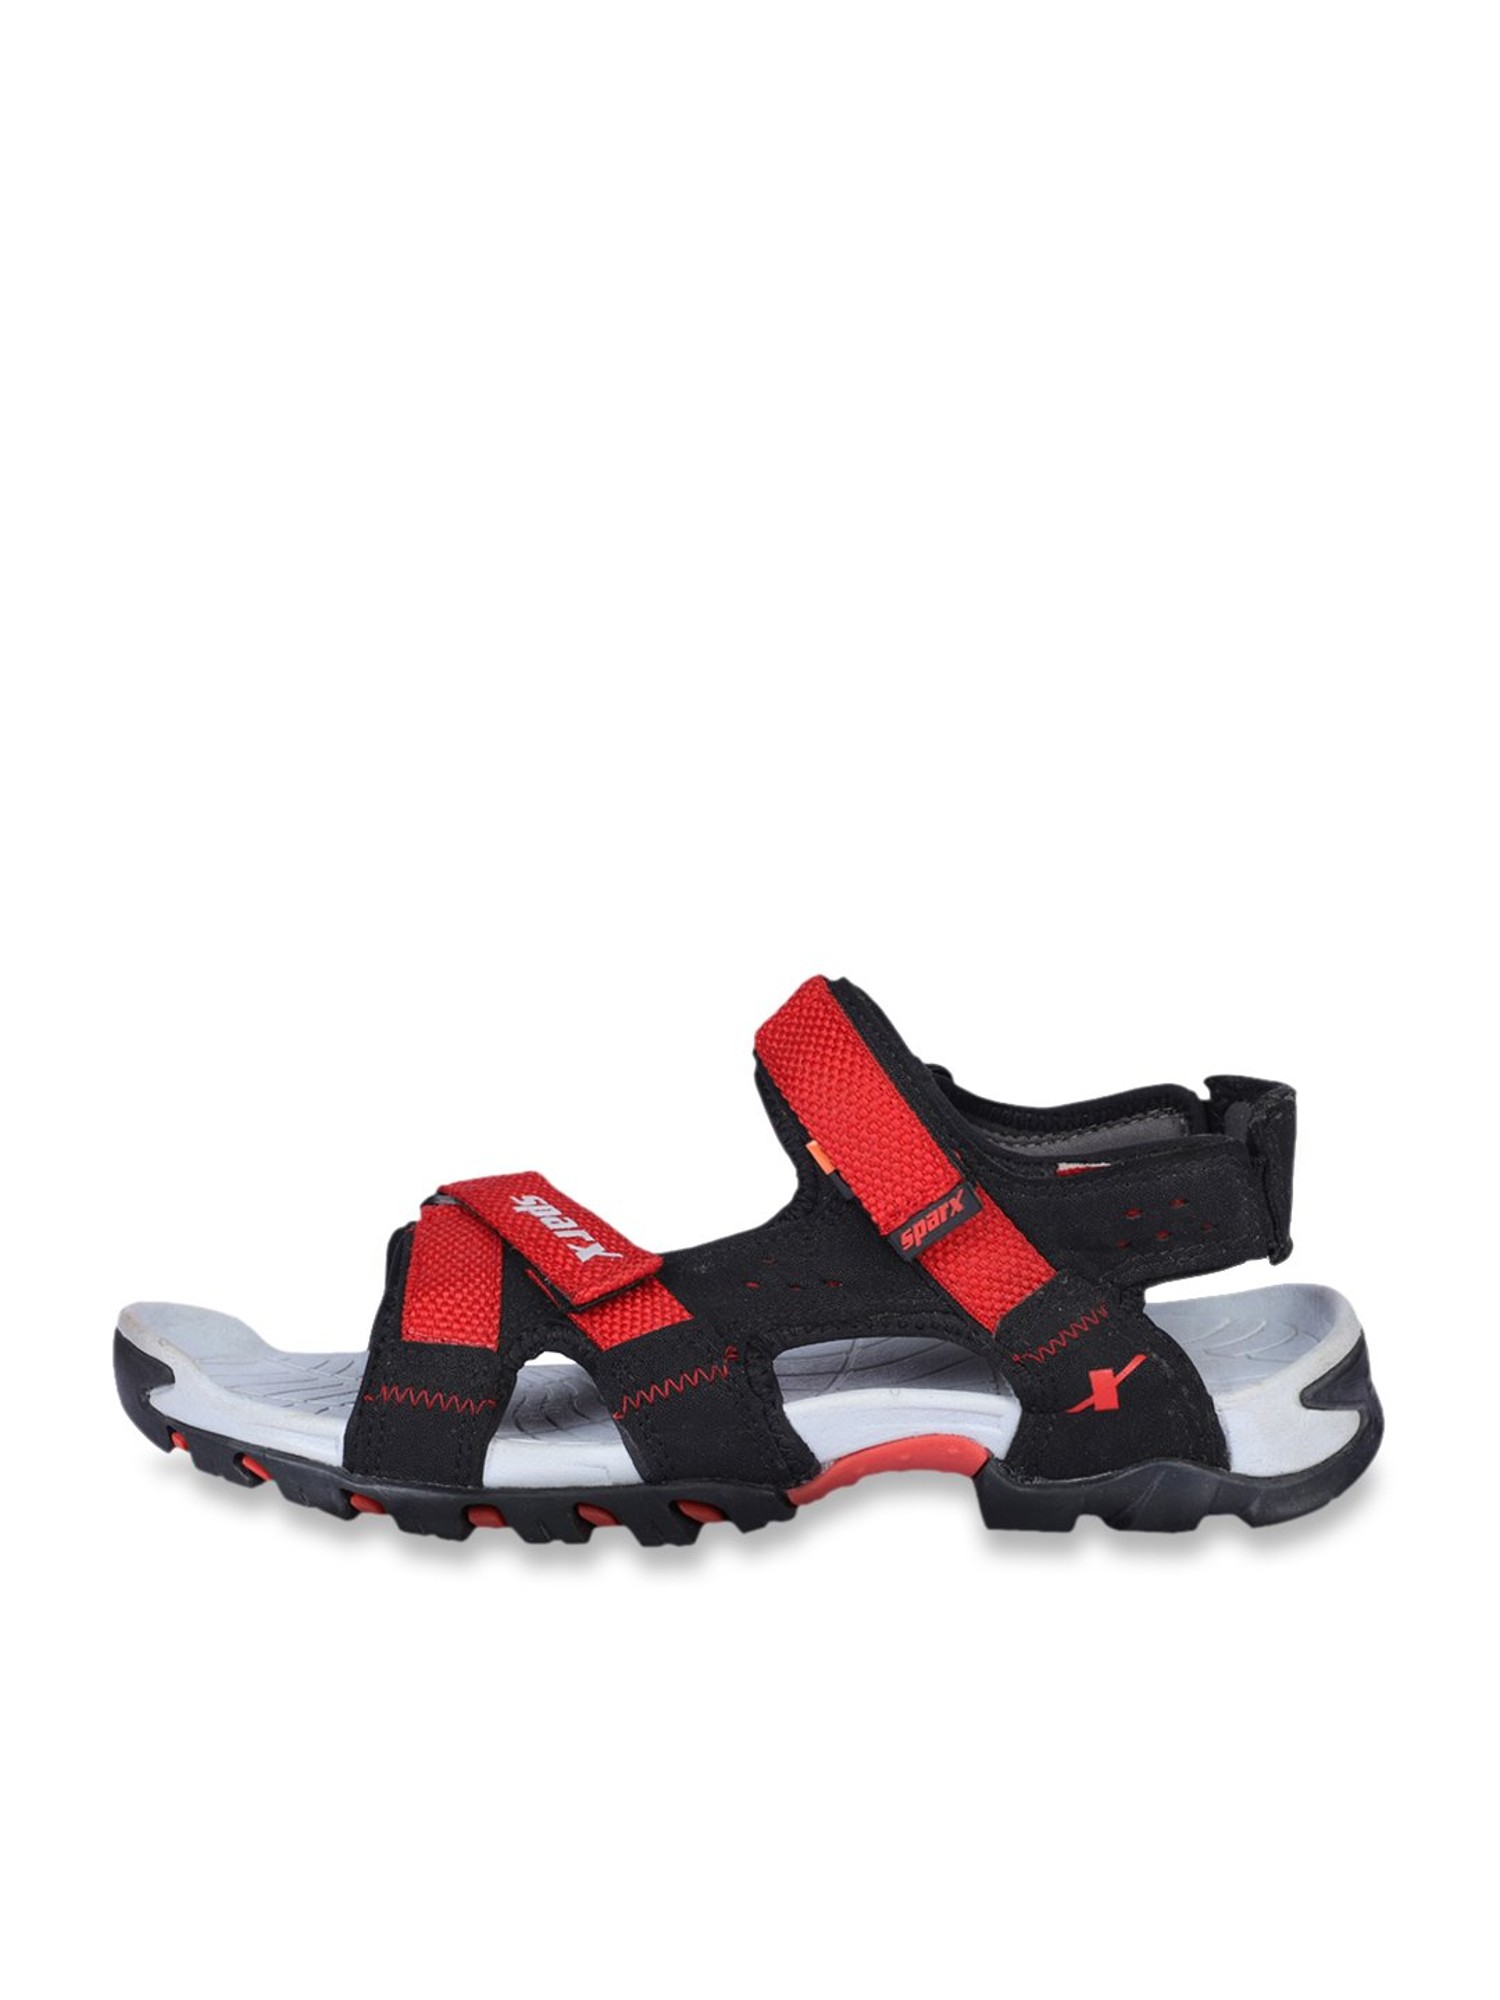 Sparx mens Ss-105 Black Red Sandal - 9 UK (SS-105) : Amazon.in: Fashion